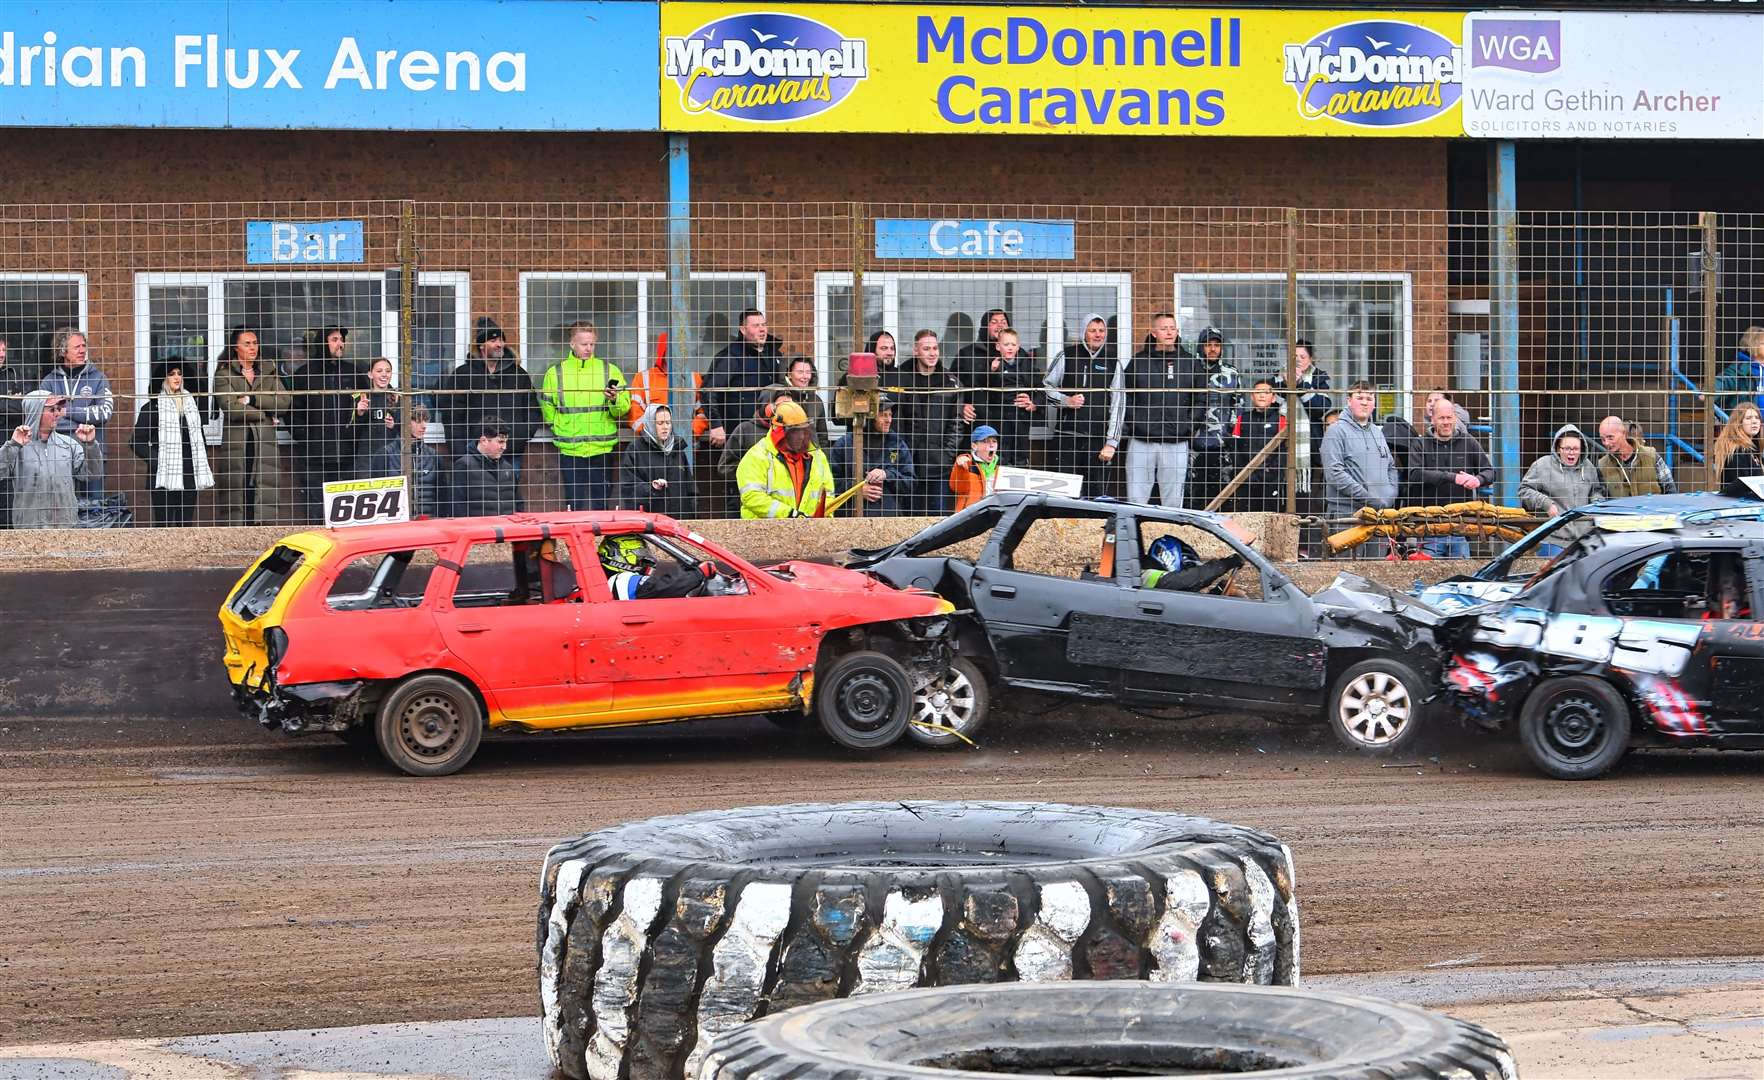 Ryan Sutcliffe, car 664, was lively on Saturday night and is pictured on a charge at the Adrian Flux Arena